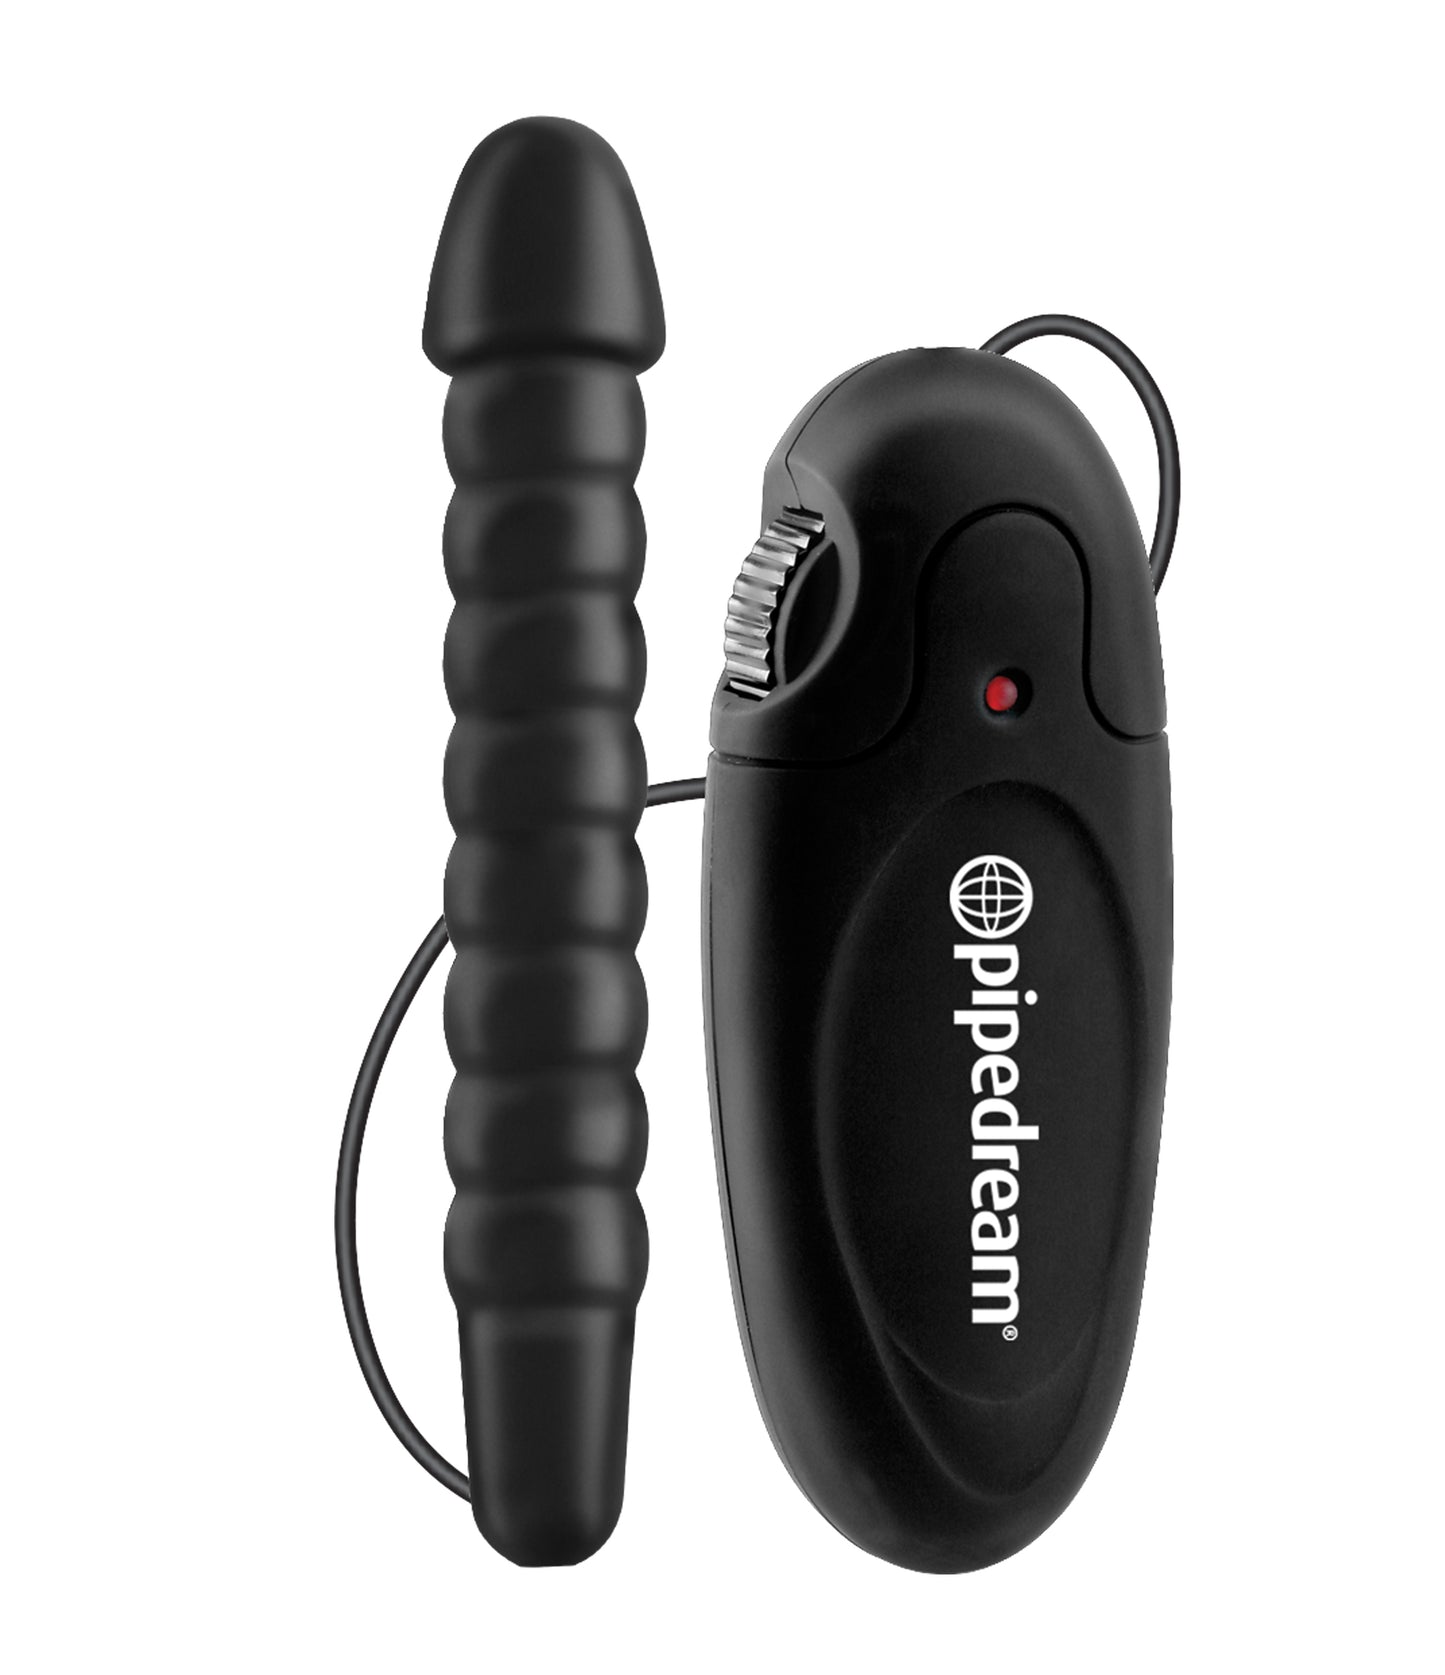 Anal Fantasy Collection Vibrating Butt Buddy - Black